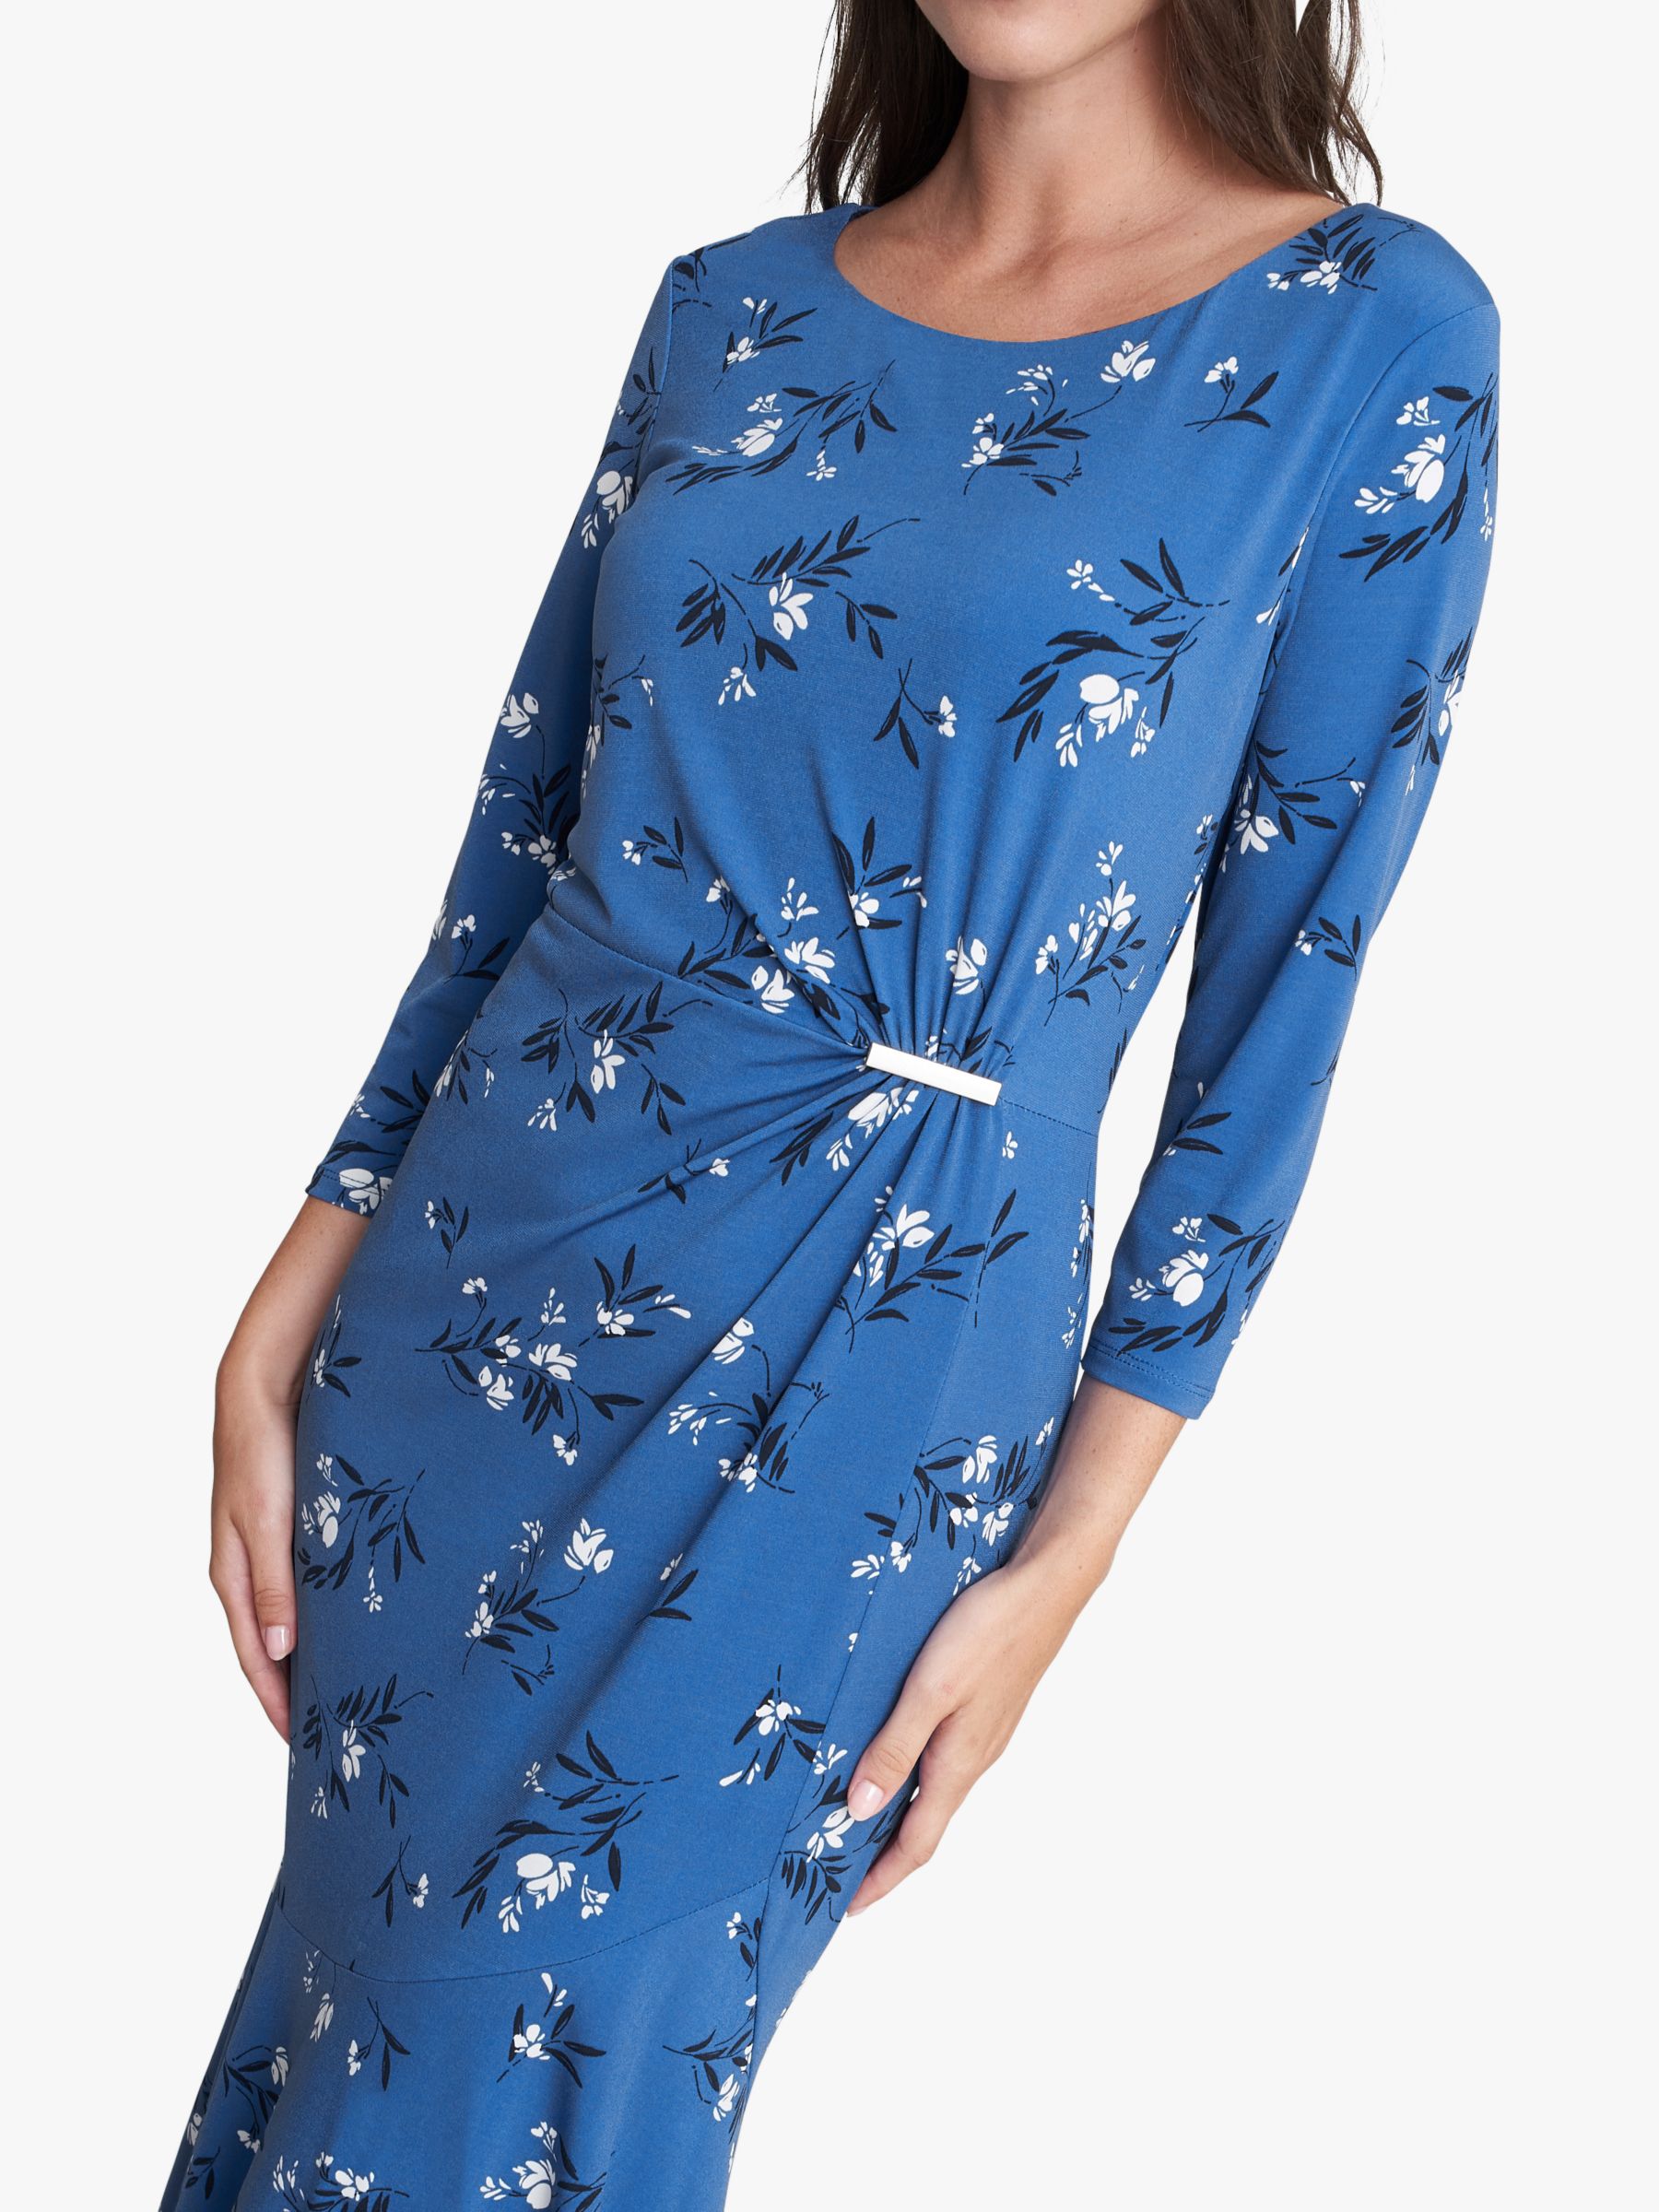 Buy Gina Bacconi Betty Floral Jersey Midi Dress, Blue Online at johnlewis.com